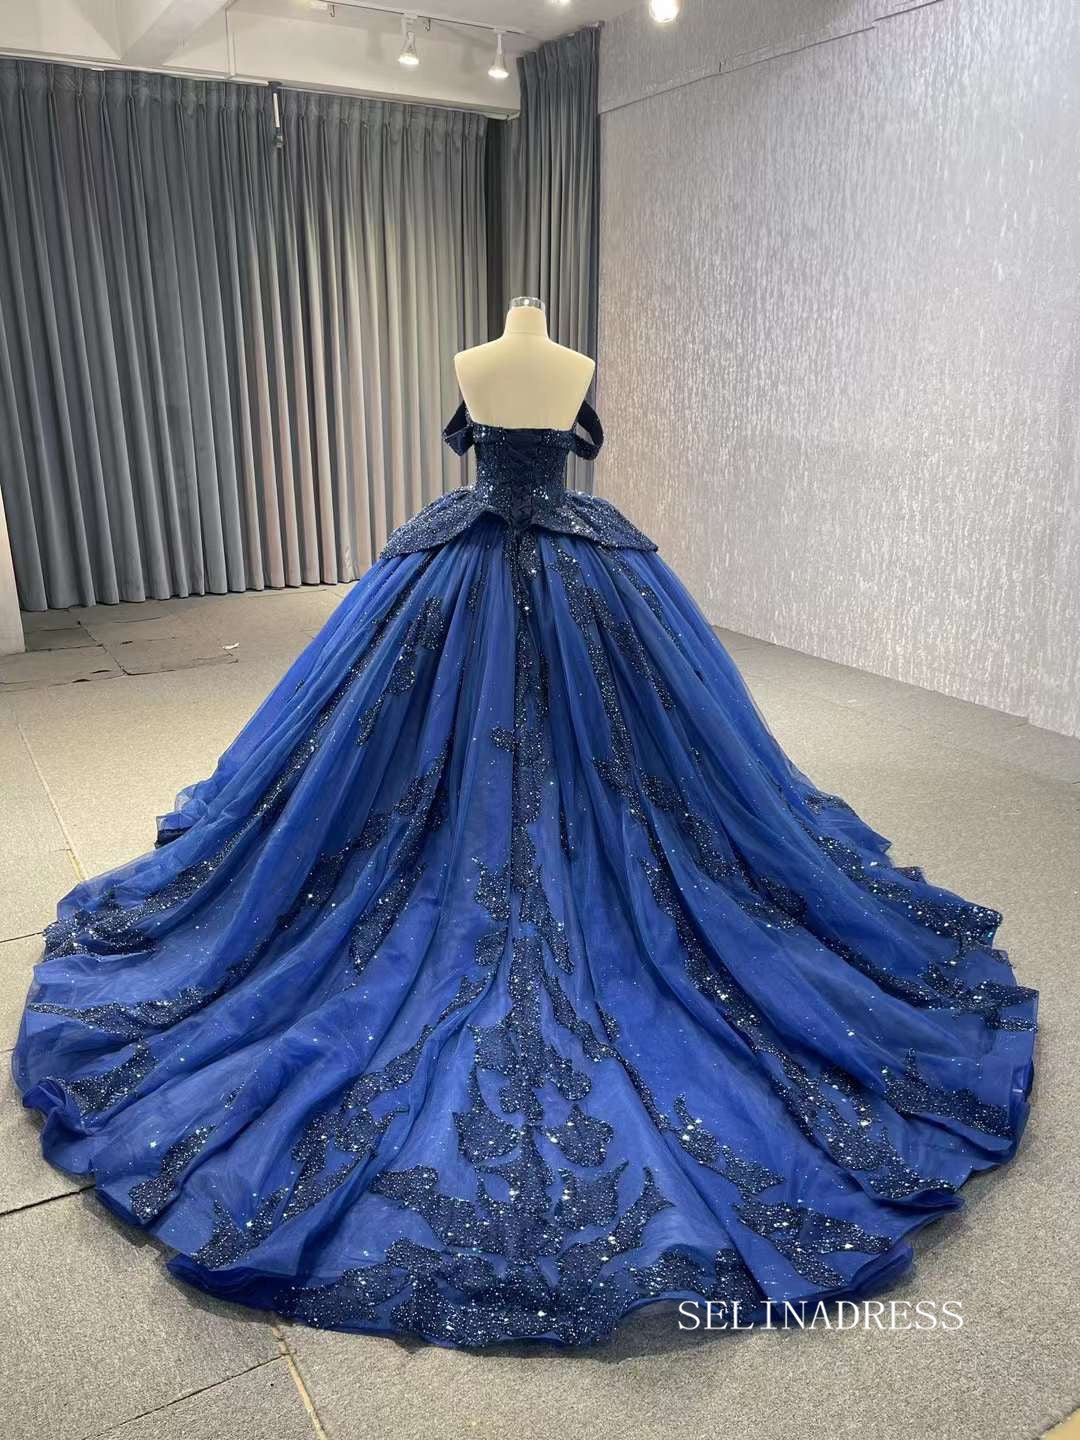 Amazon.com: Leyidress Princess Gradient Ball Gown Evening Dresses Gowns V  Neck Cap Sleeves Prom Party Dresses 2 Blue: Clothing, Shoes & Jewelry